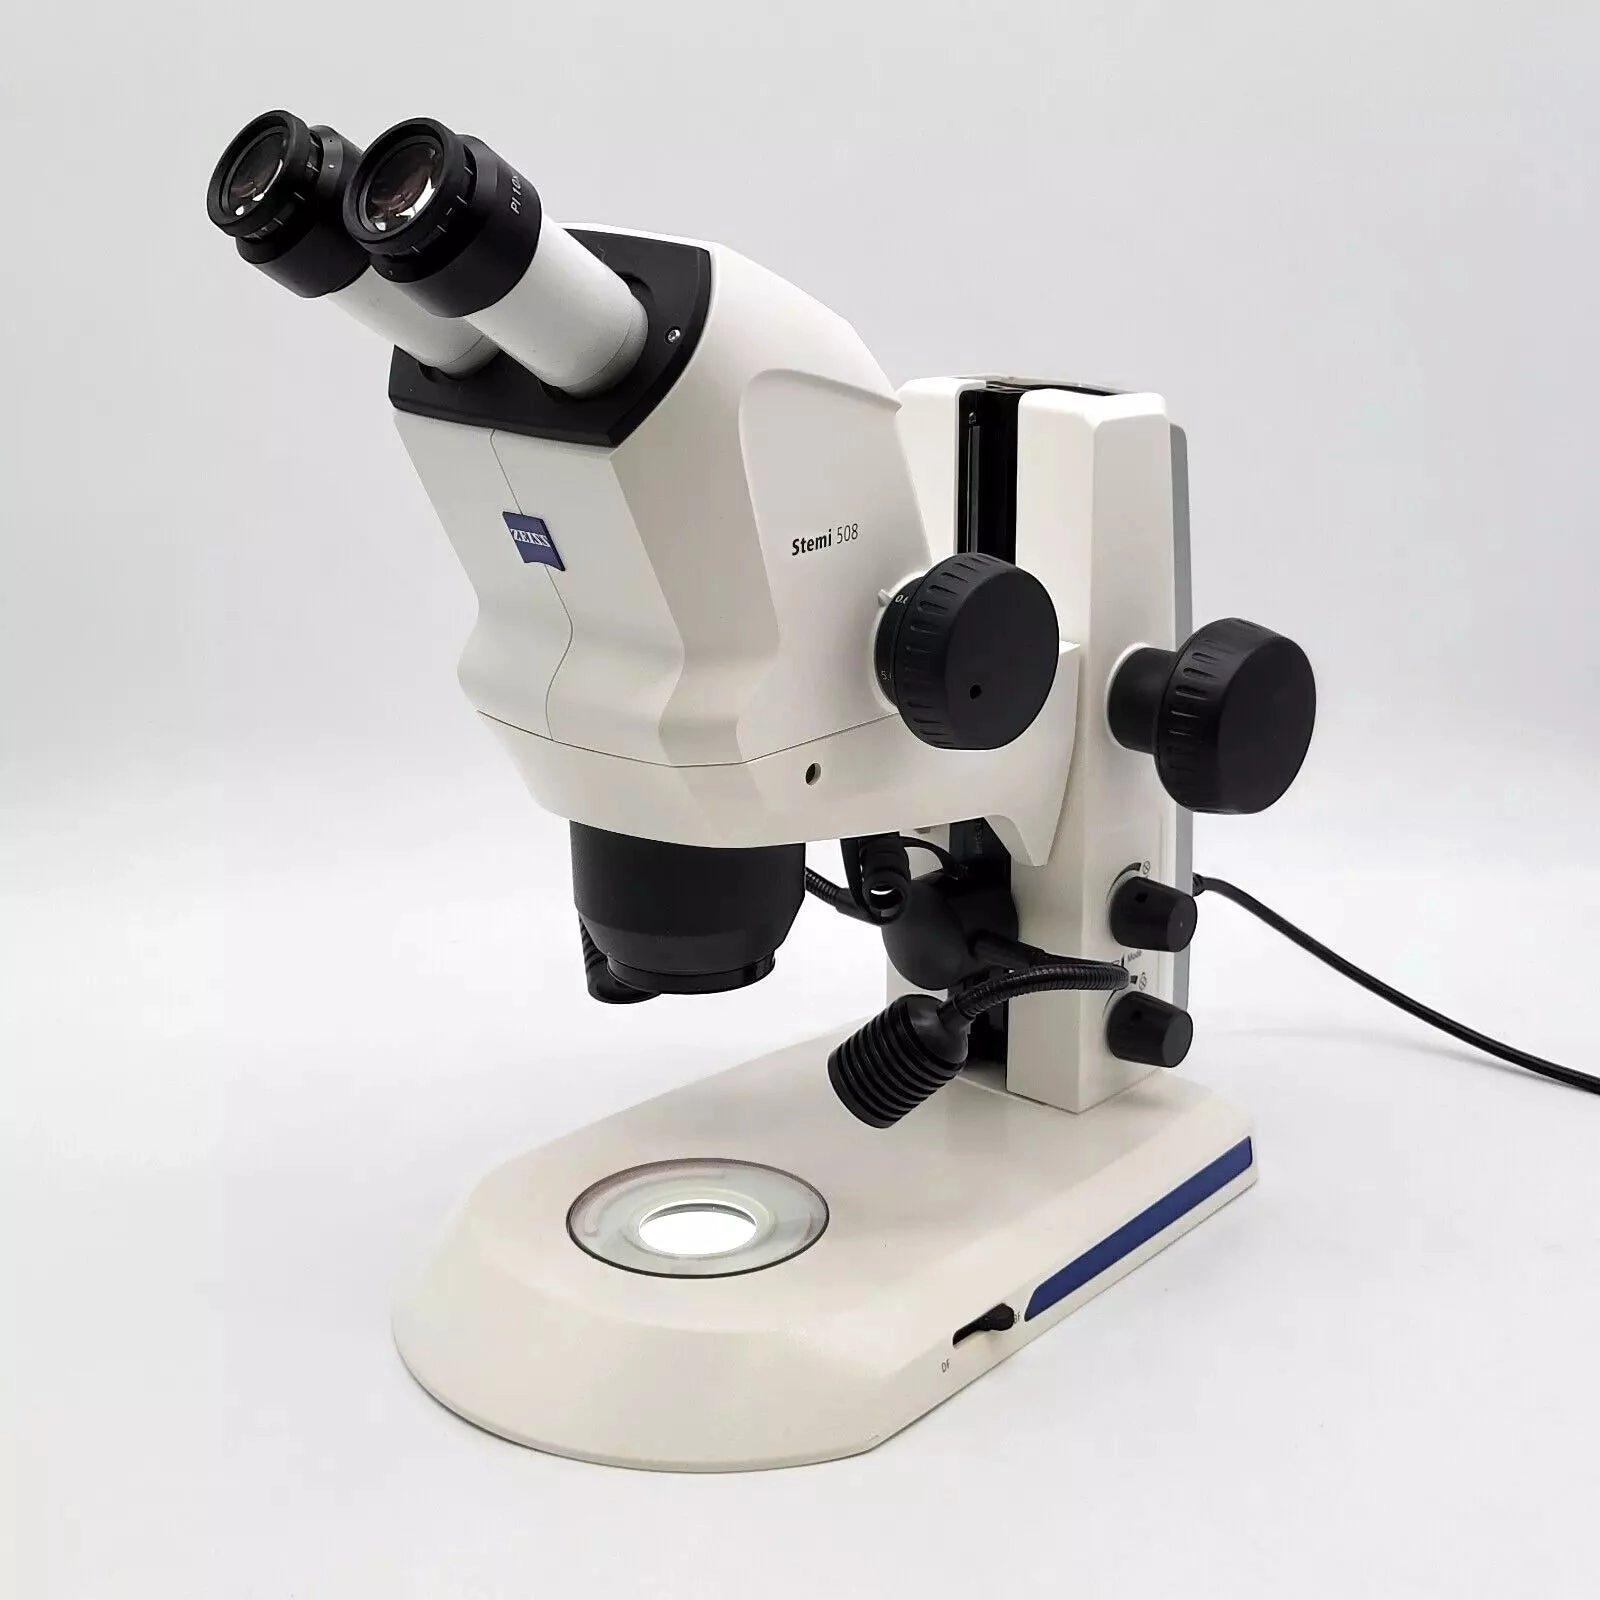 Zeiss Stereo Microscope Stemi 508 with Transmitted and Reflected LED Light